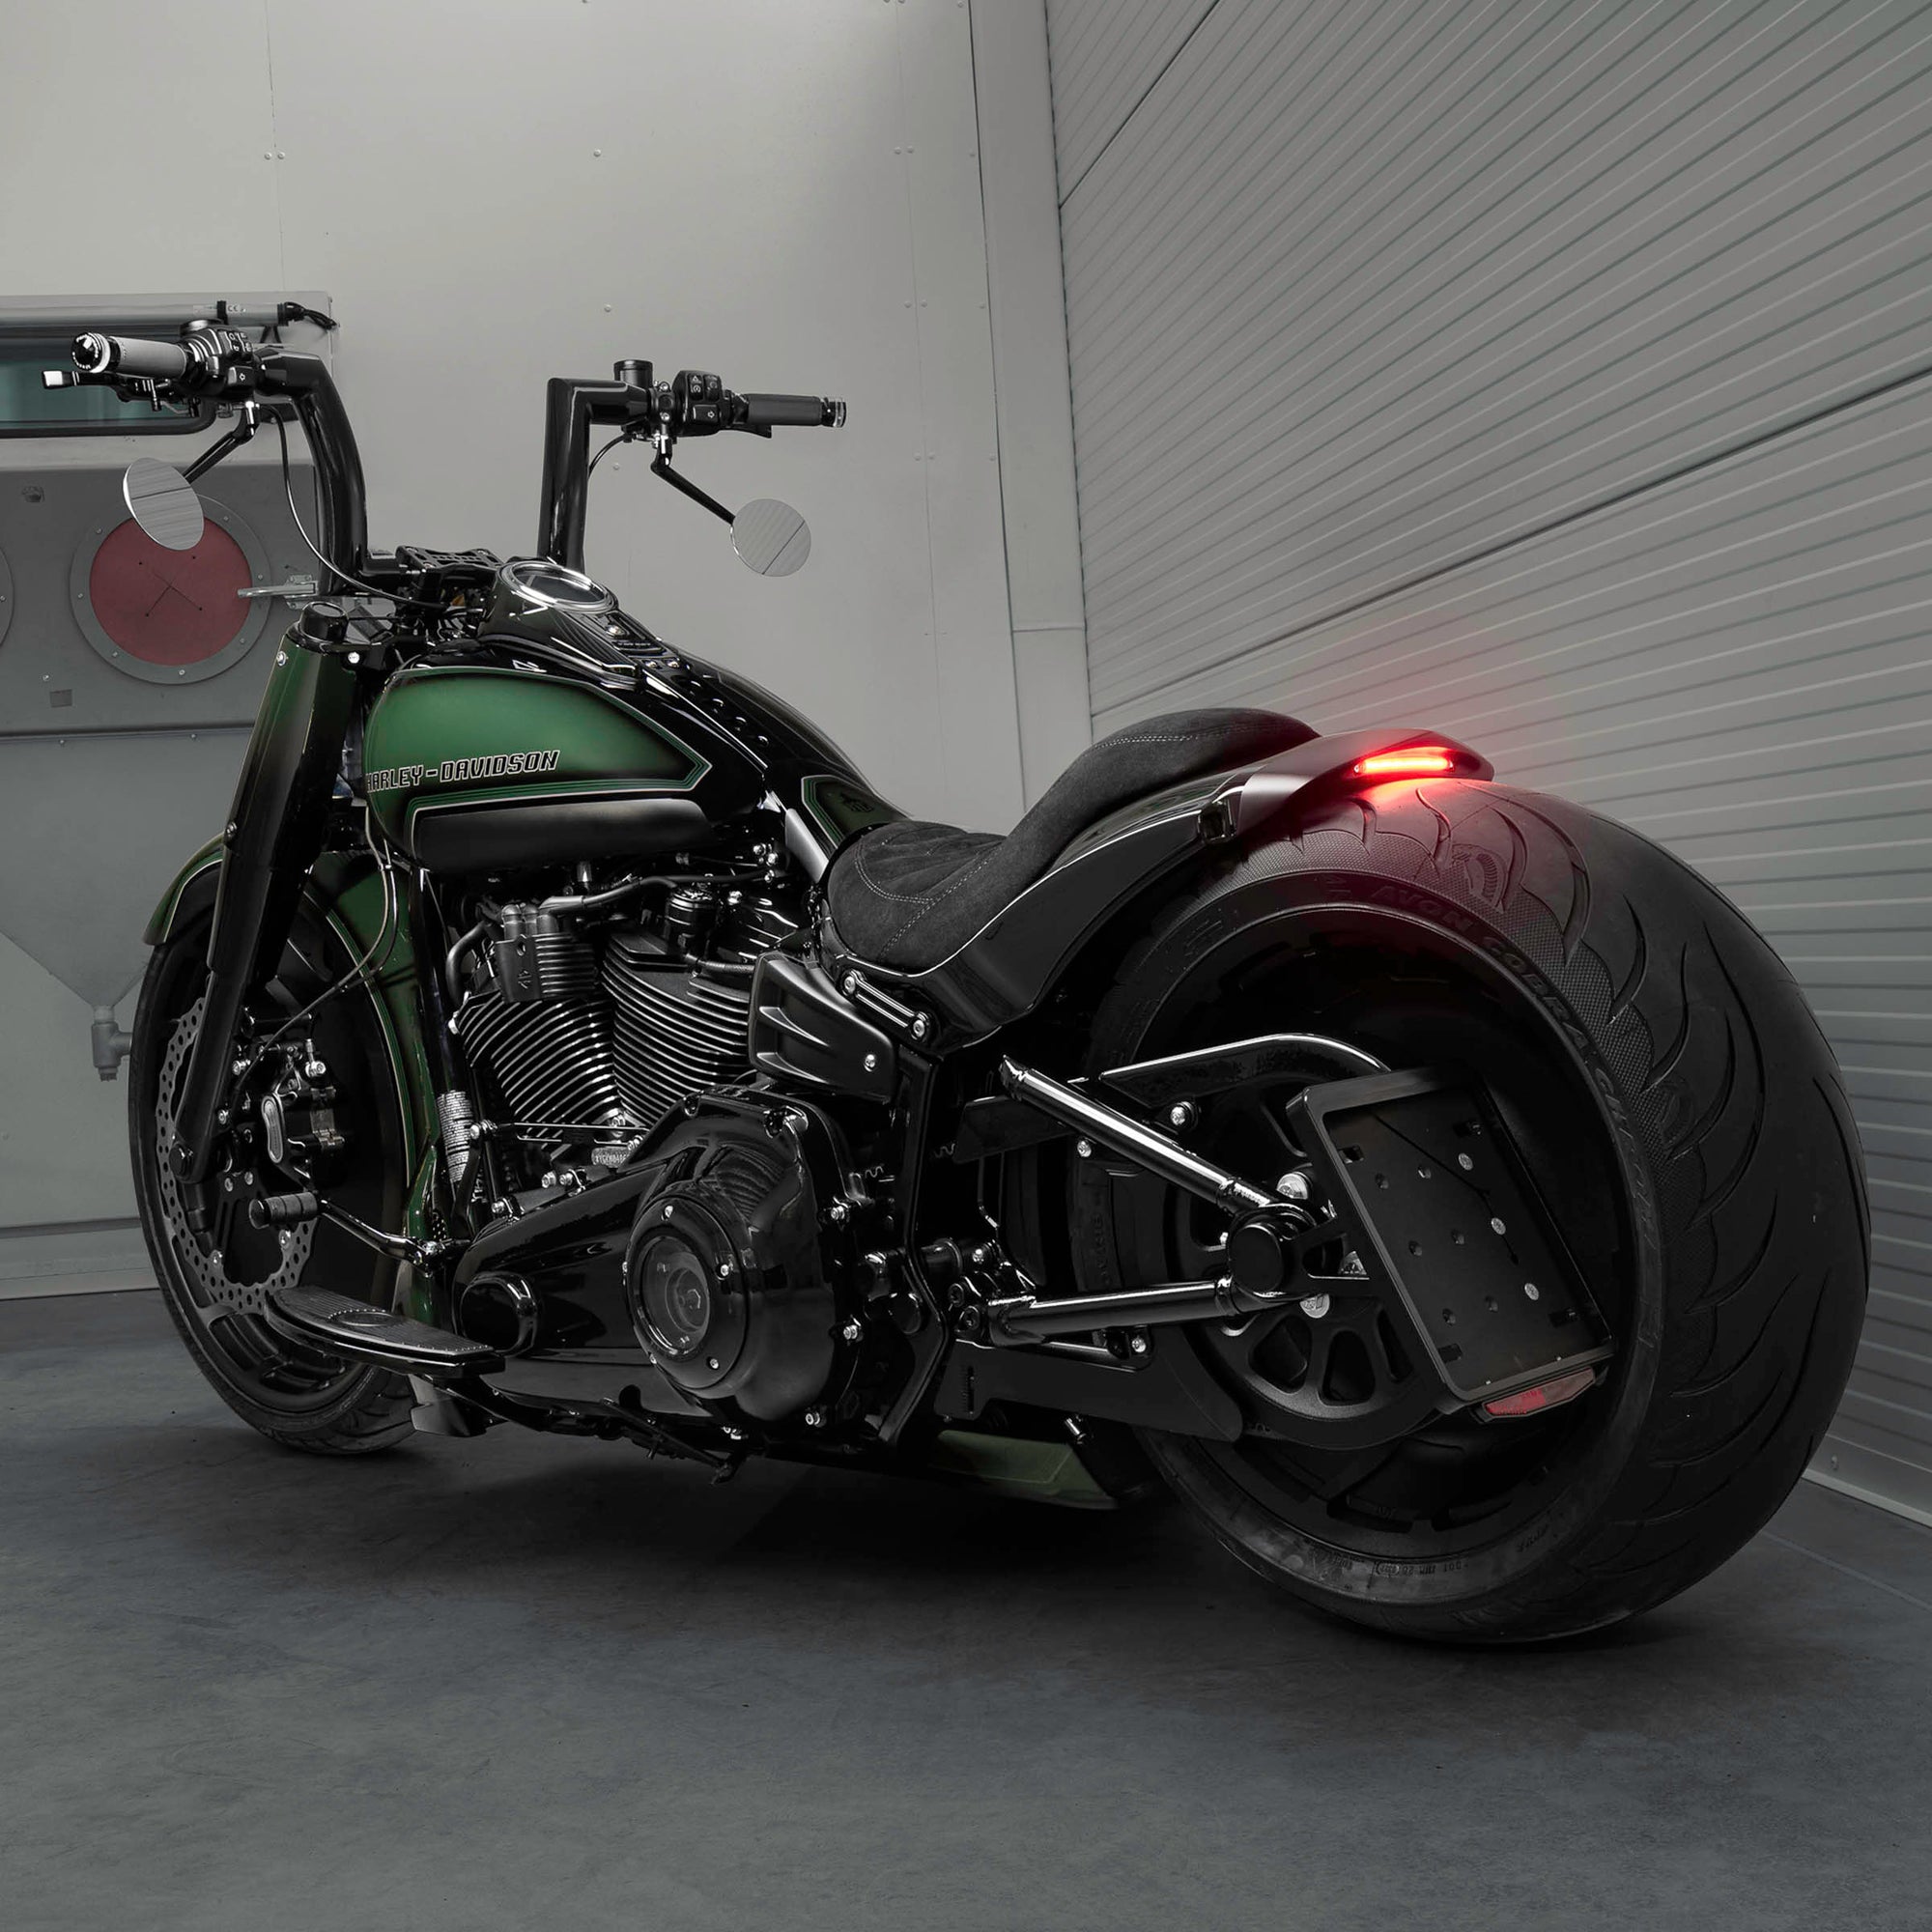 Harley Davidson motorcycle with Killer Custom parts from the rear in a spacious and modern garage